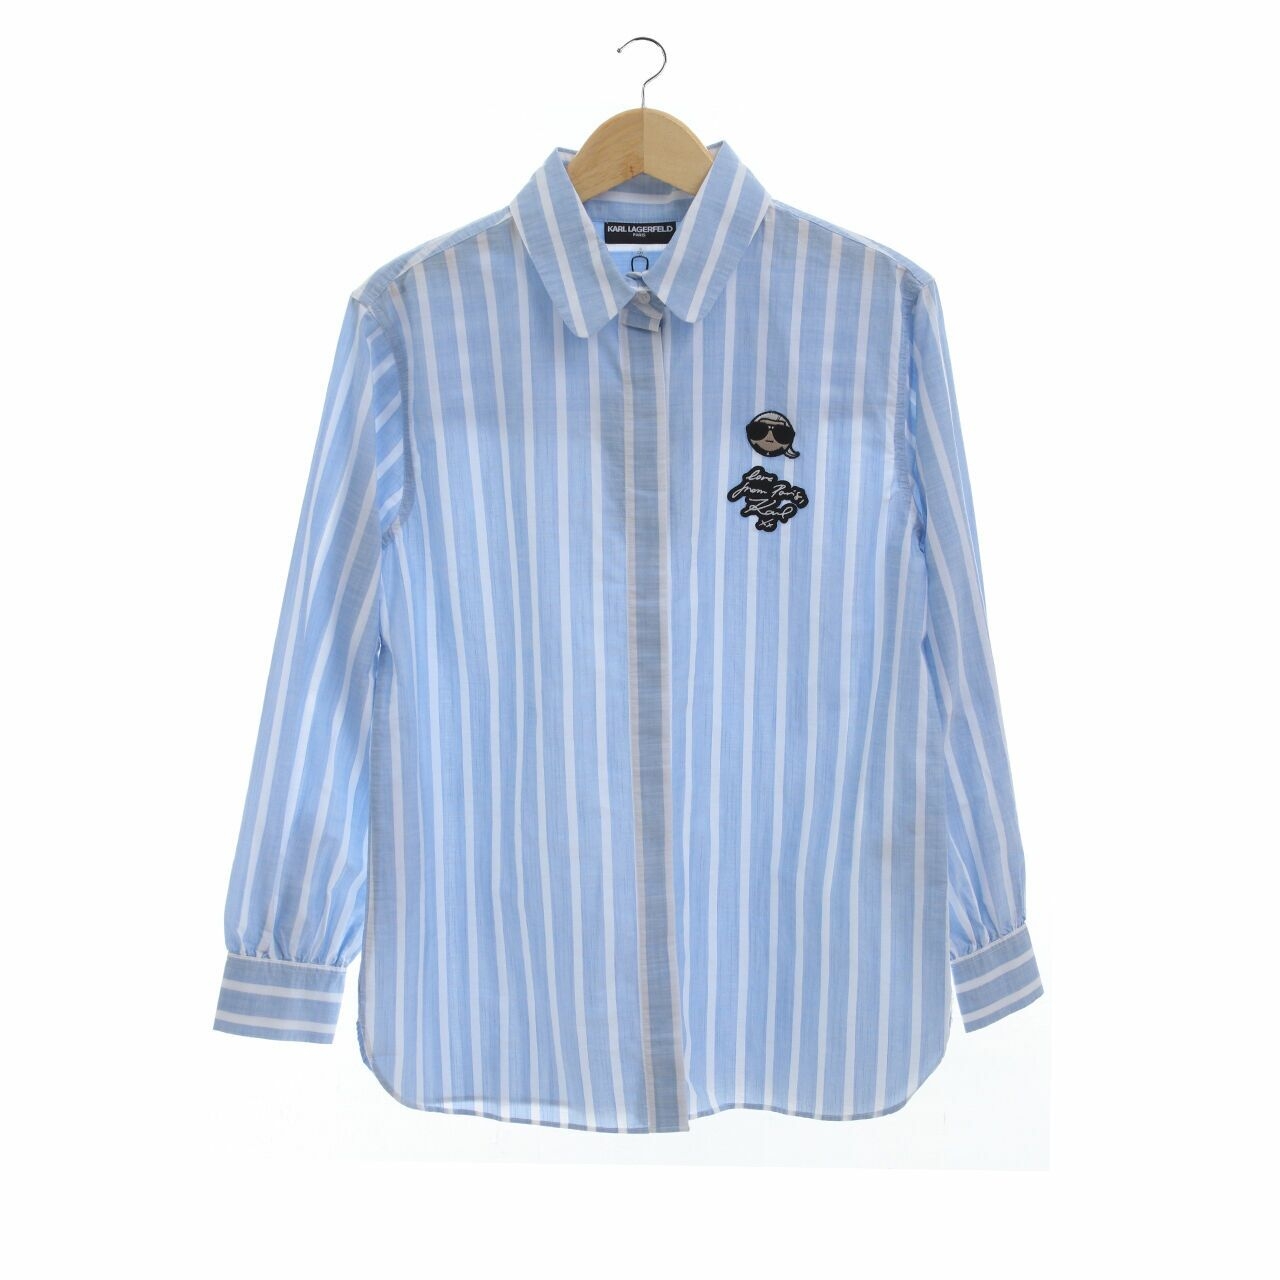 Karl Lagerfeld Stripes Blue with Patch Shirt 